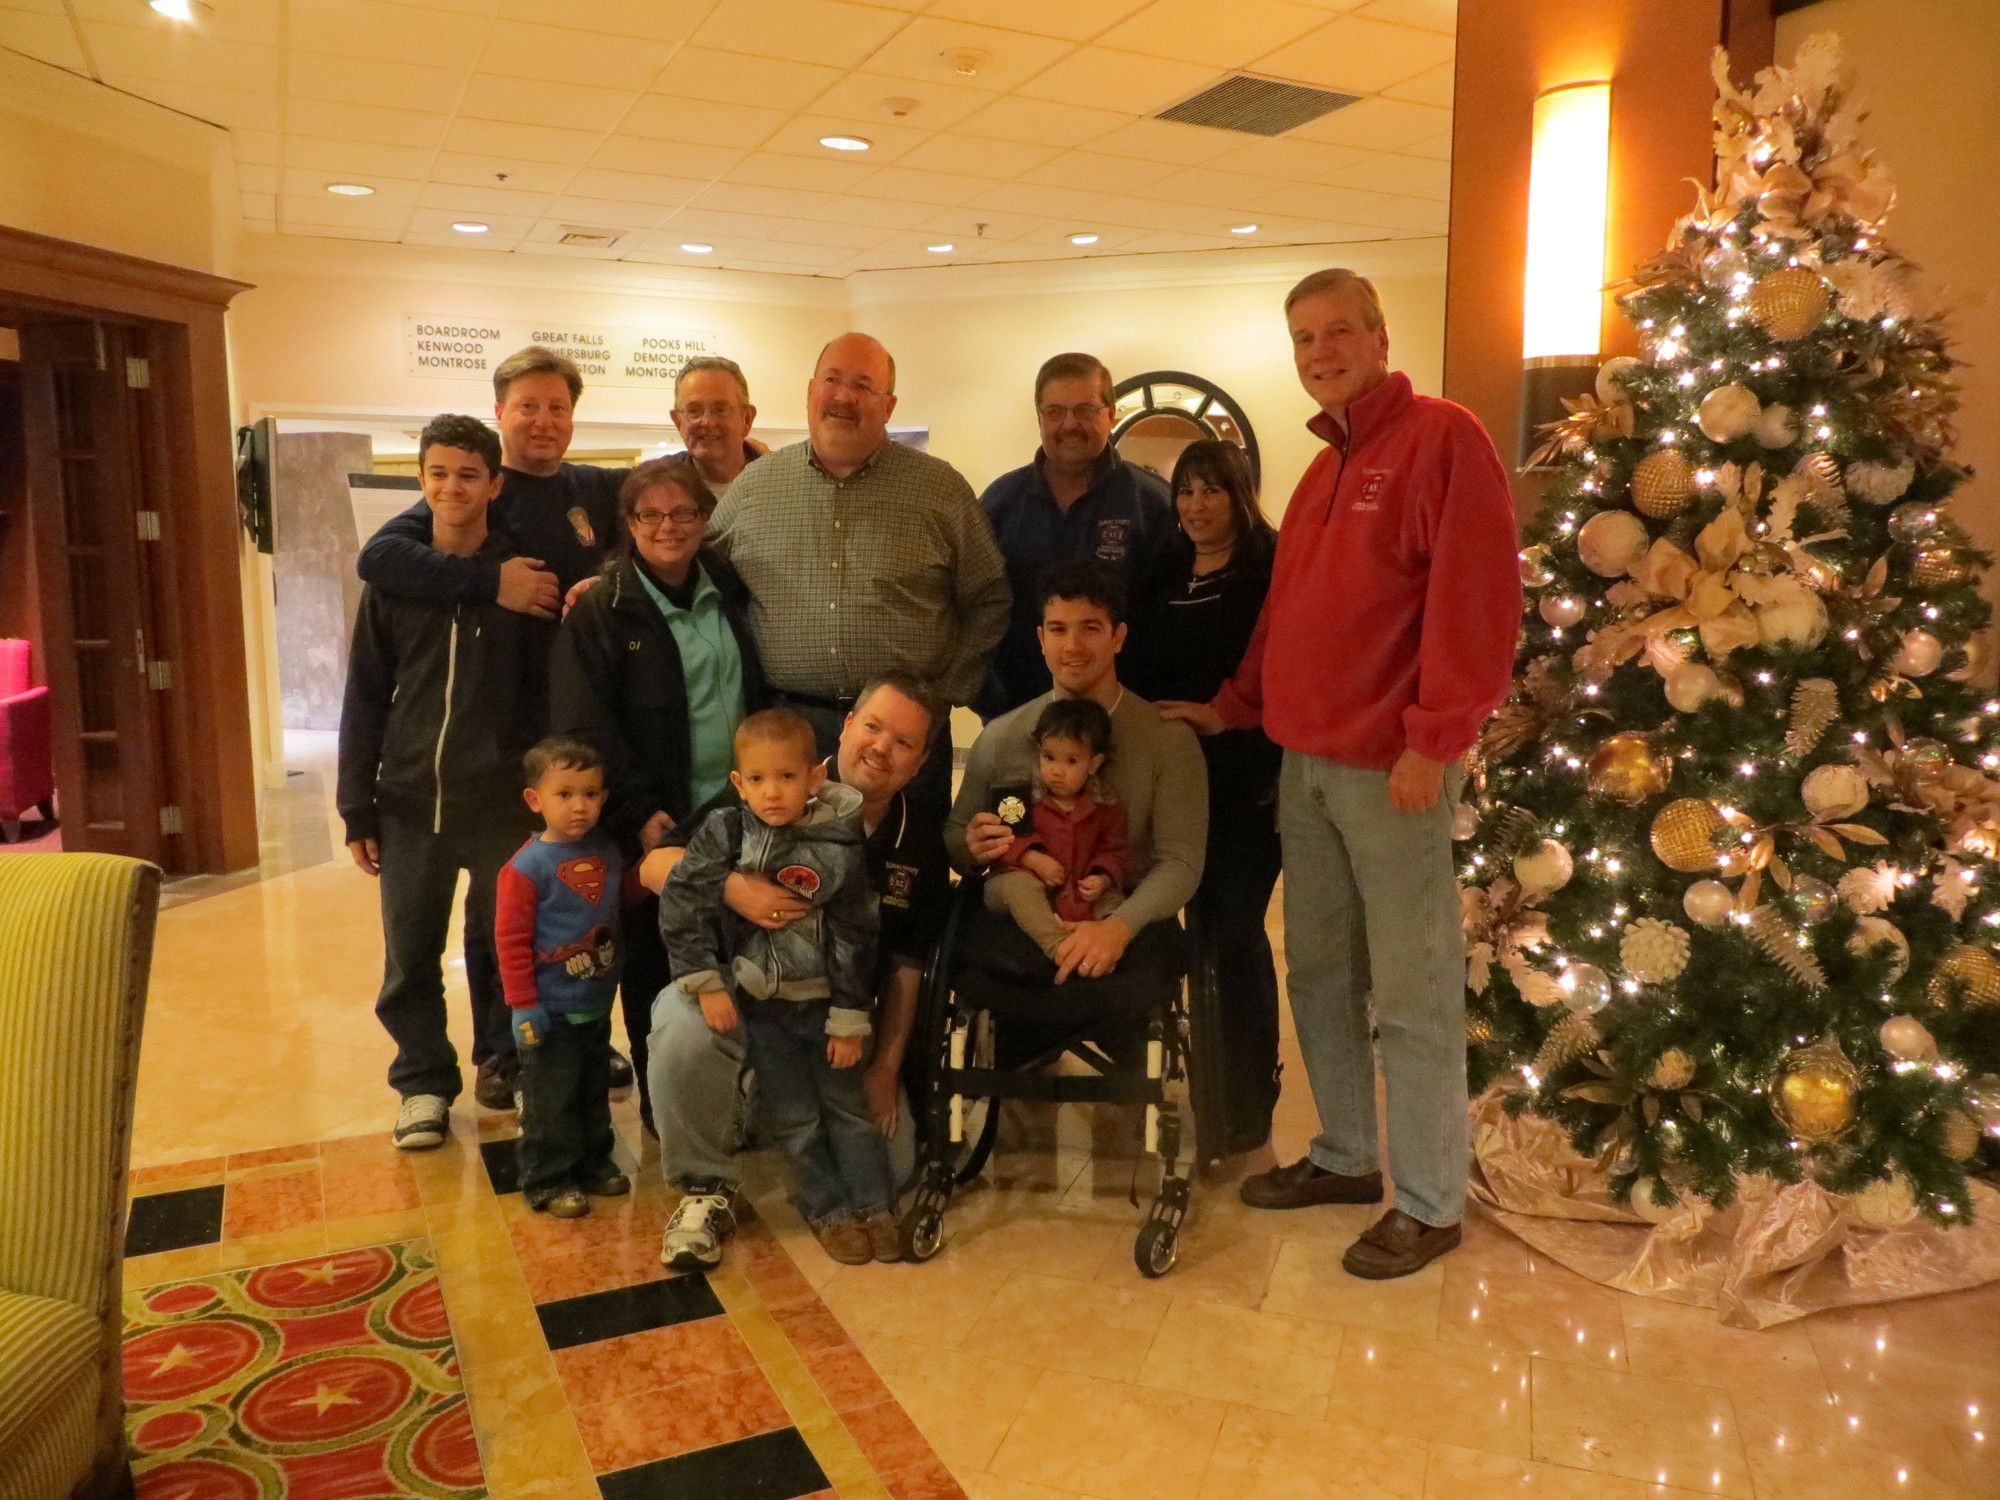 Lynbrook firefighters joined with Marcos Dandrea and his family around the Christmas tree.